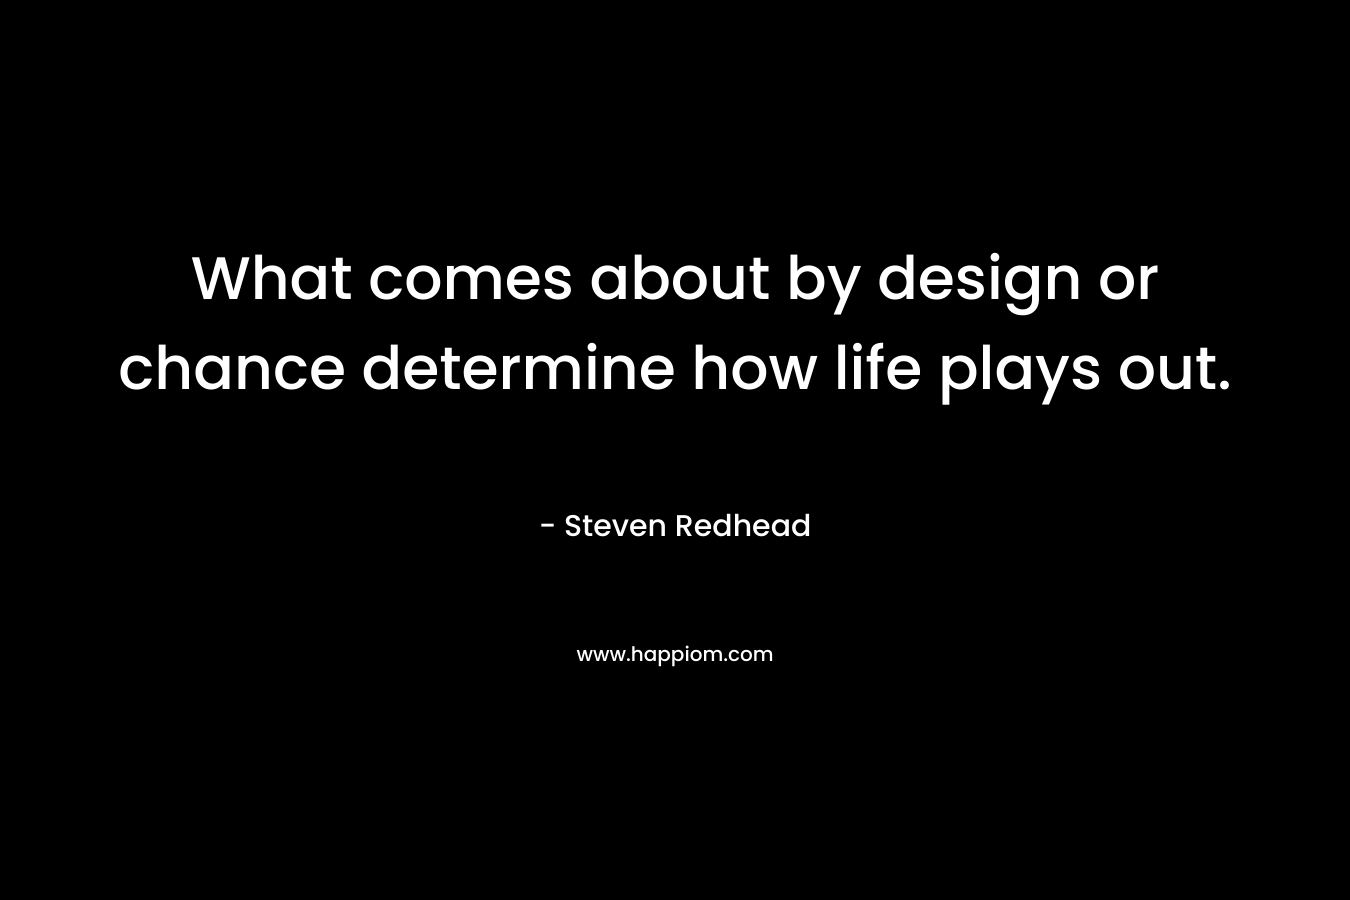 What comes about by design or chance determine how life plays out.